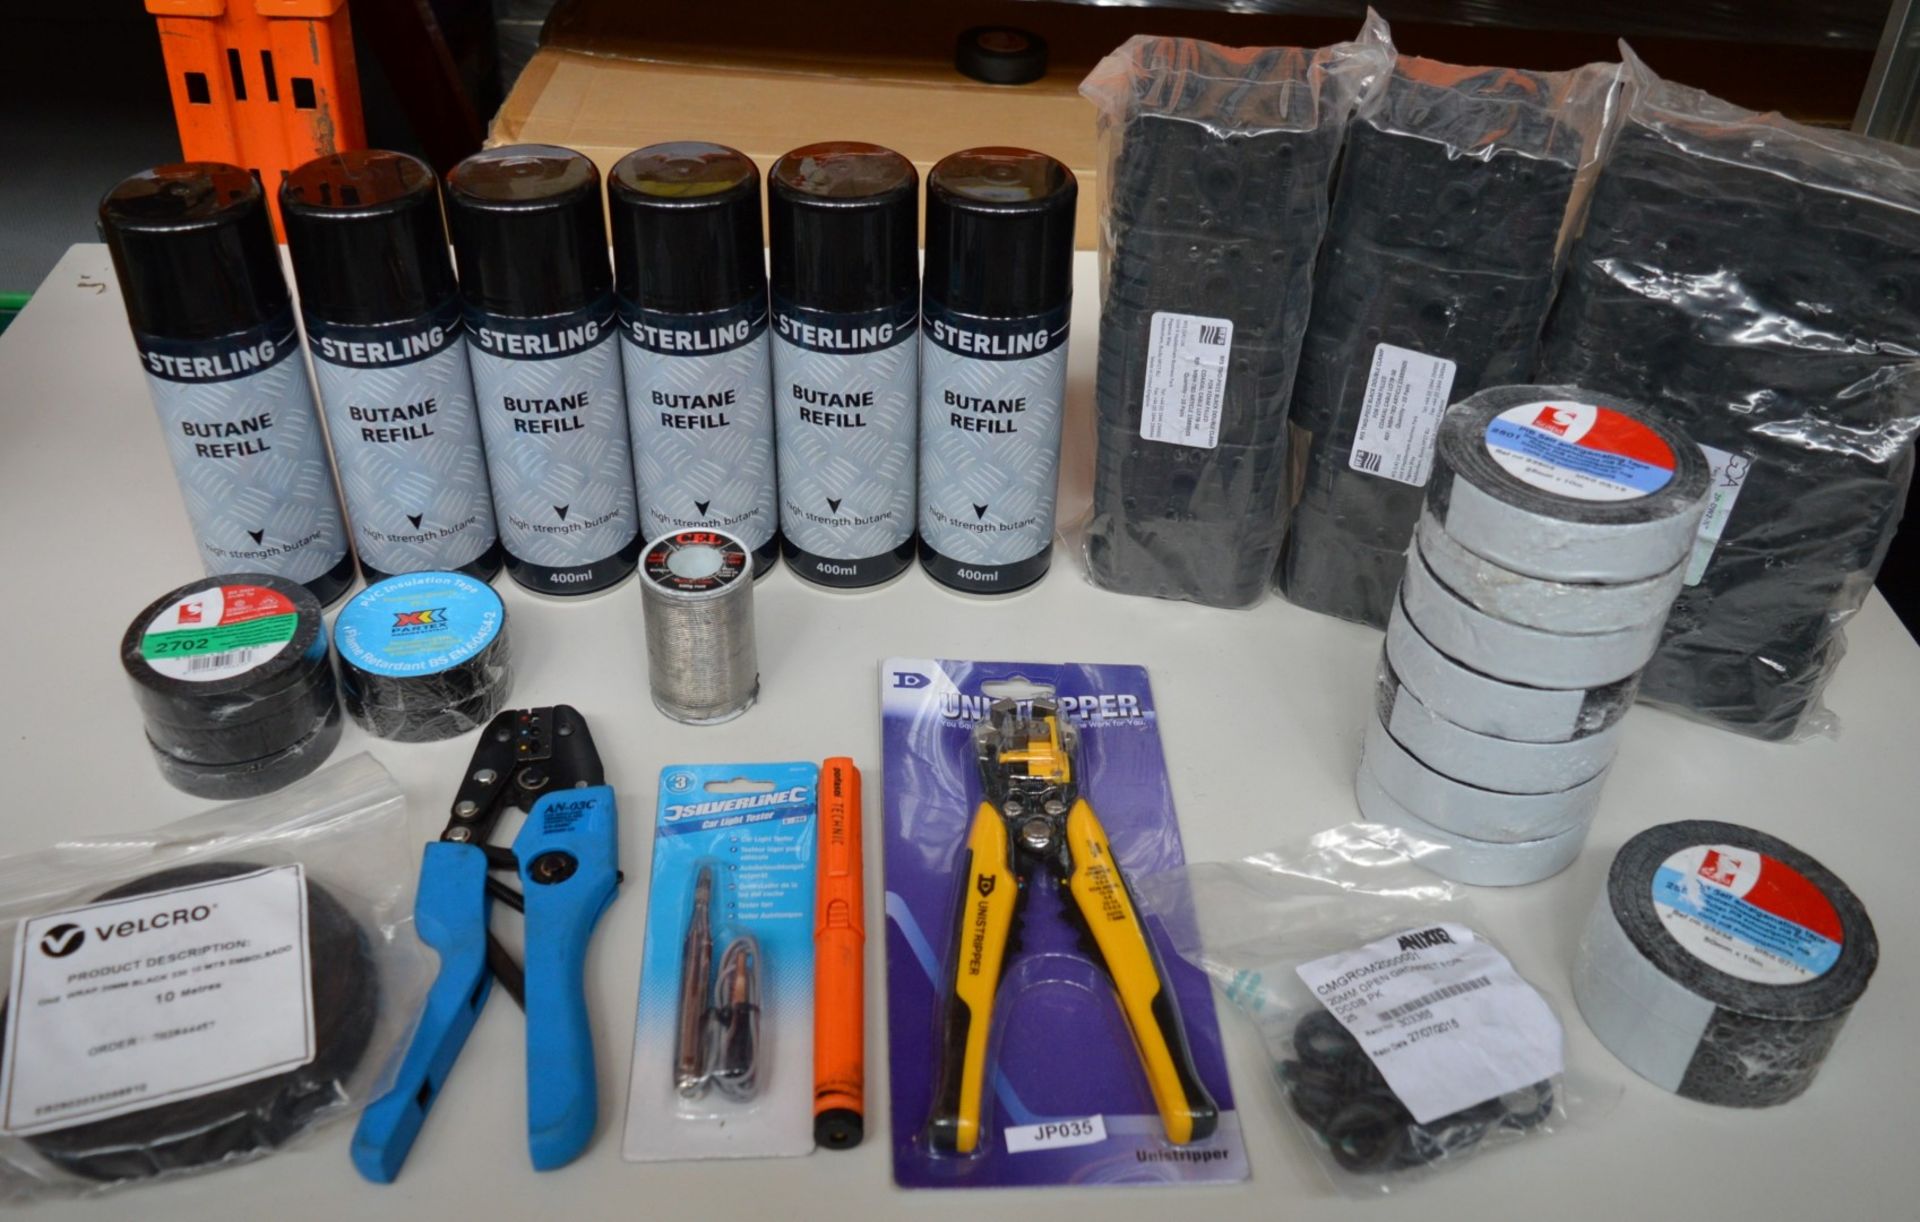 Assorted Collection of Electrical Consumables - CL300 - Including 6 x Sterling Butane Refills, 1 x